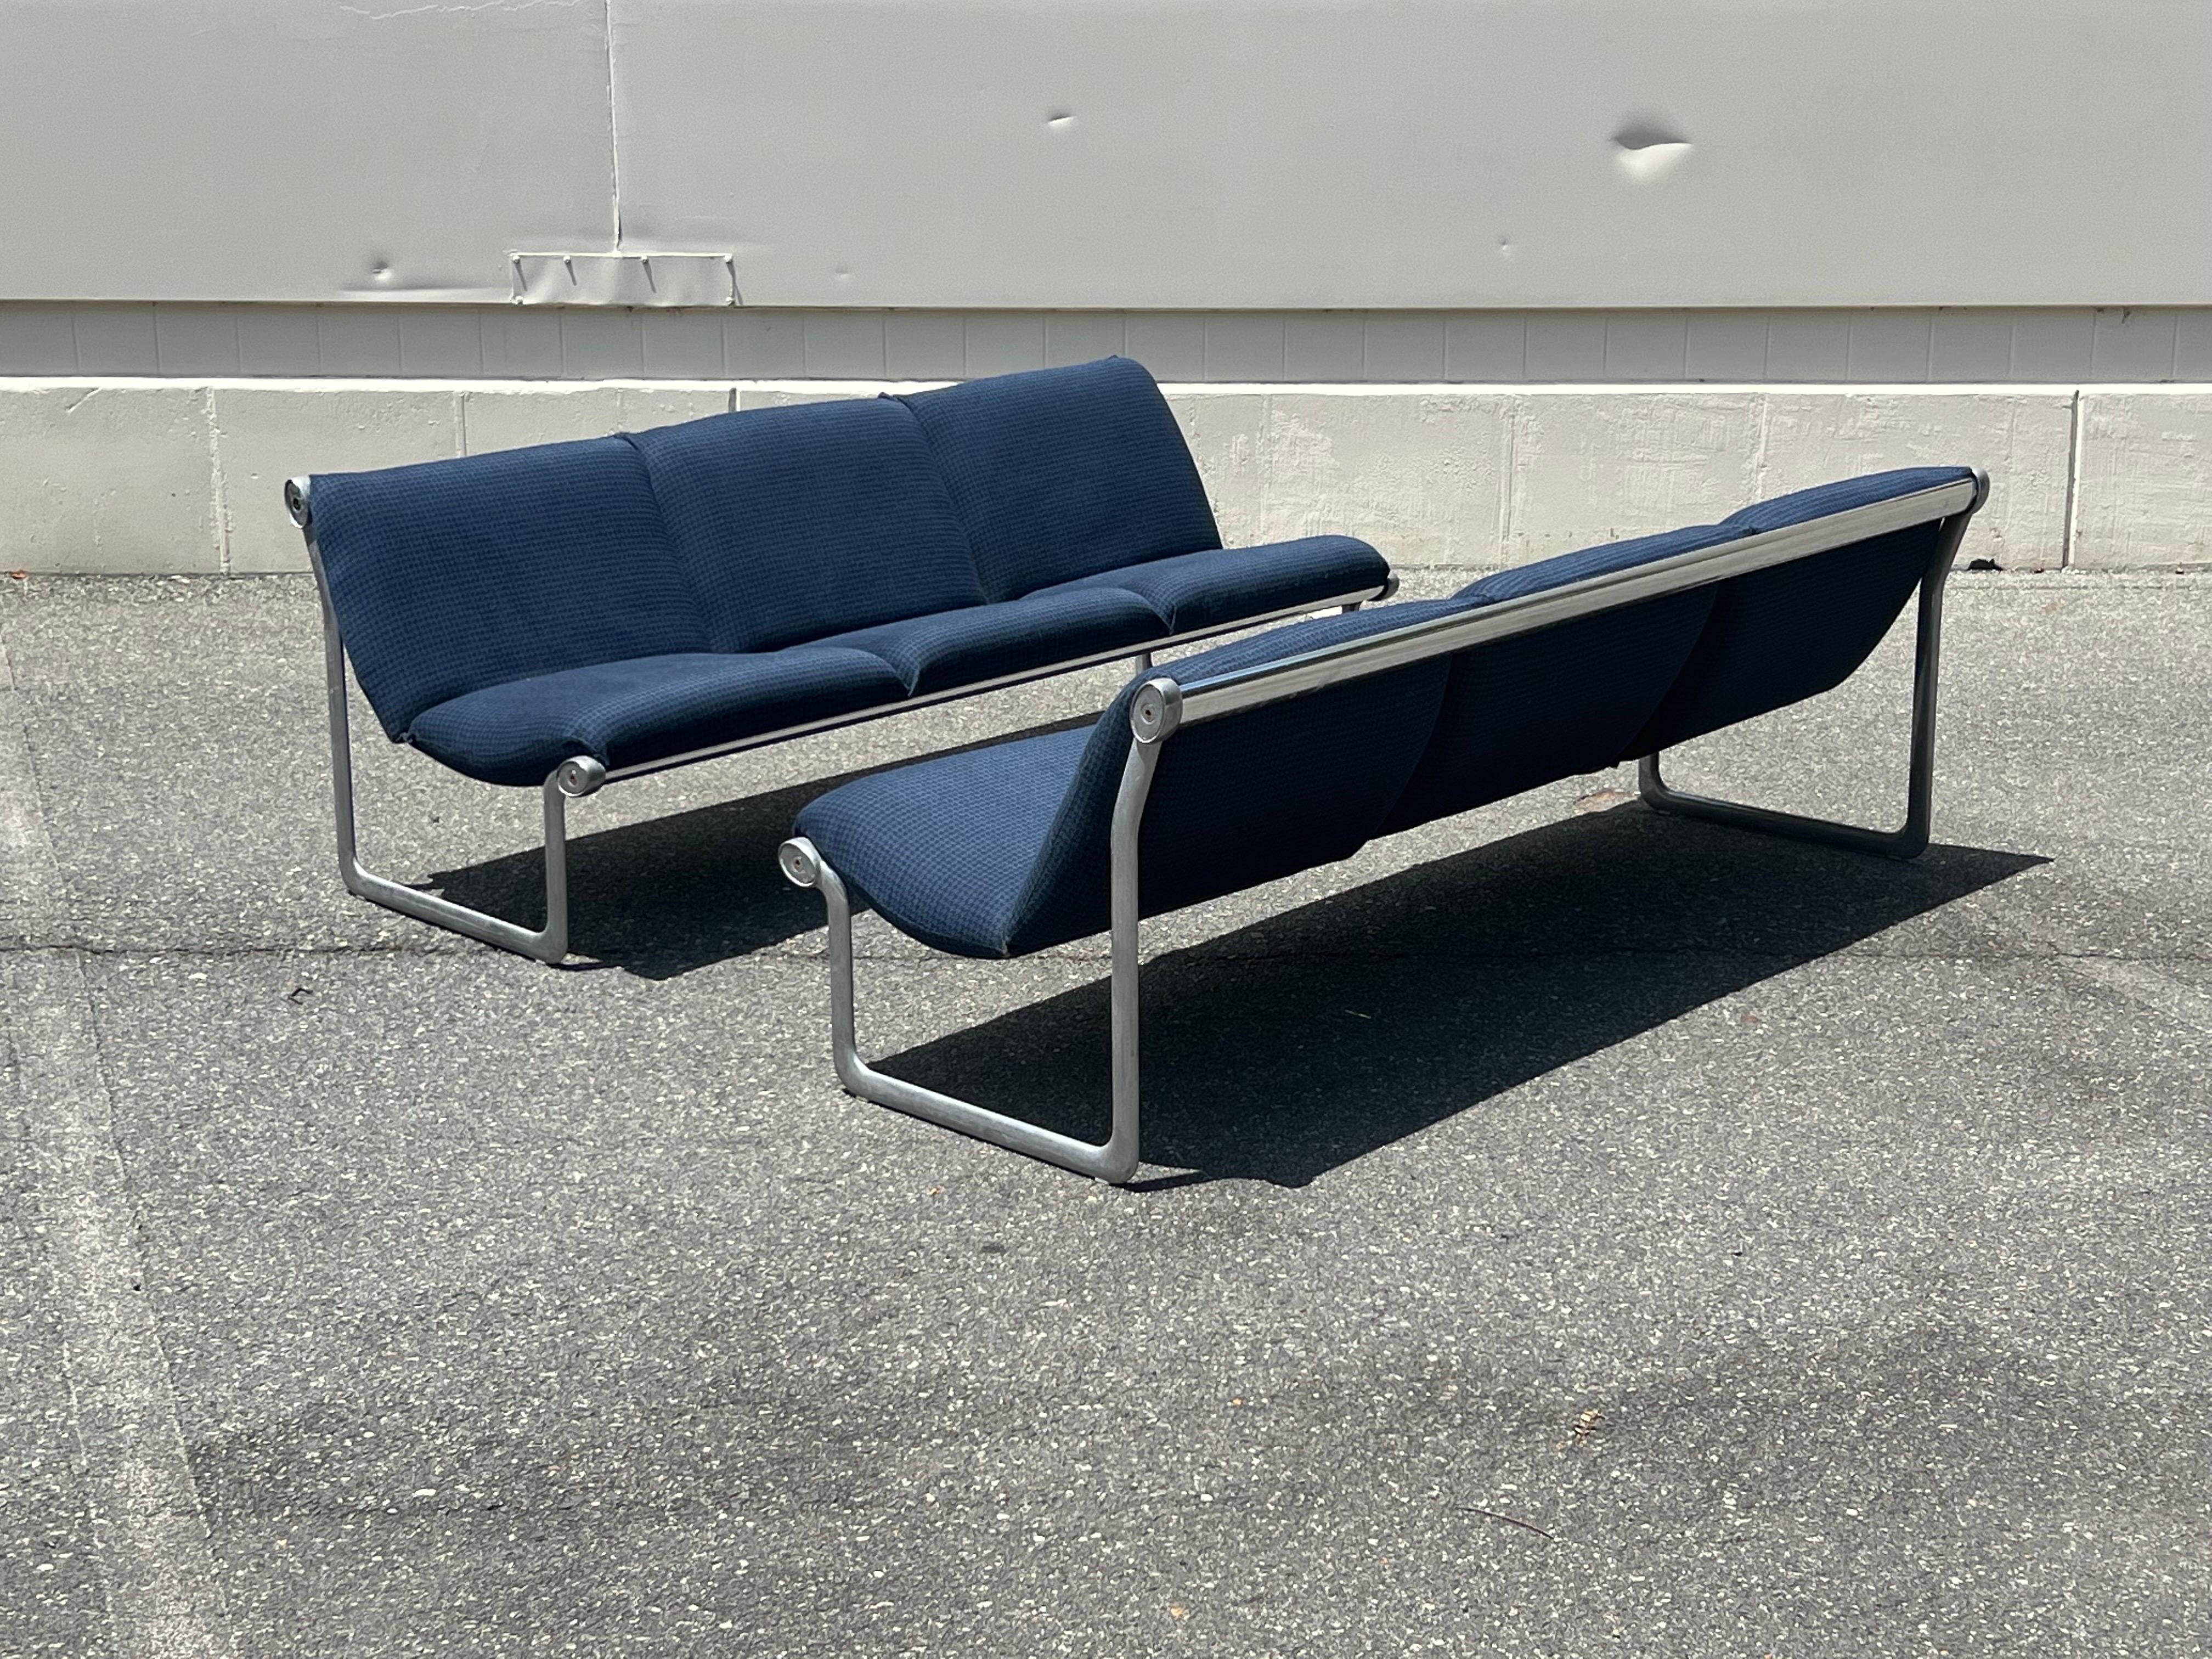 Two matching three-seat settee sofas designed by Bruce Hannah and Andrew Morrison for Knoll circa 1970s. These “sling” sofas have a sleek profile and versatile feel. Equipped with aluminum legs and chrome support that the cushions float effortlessly